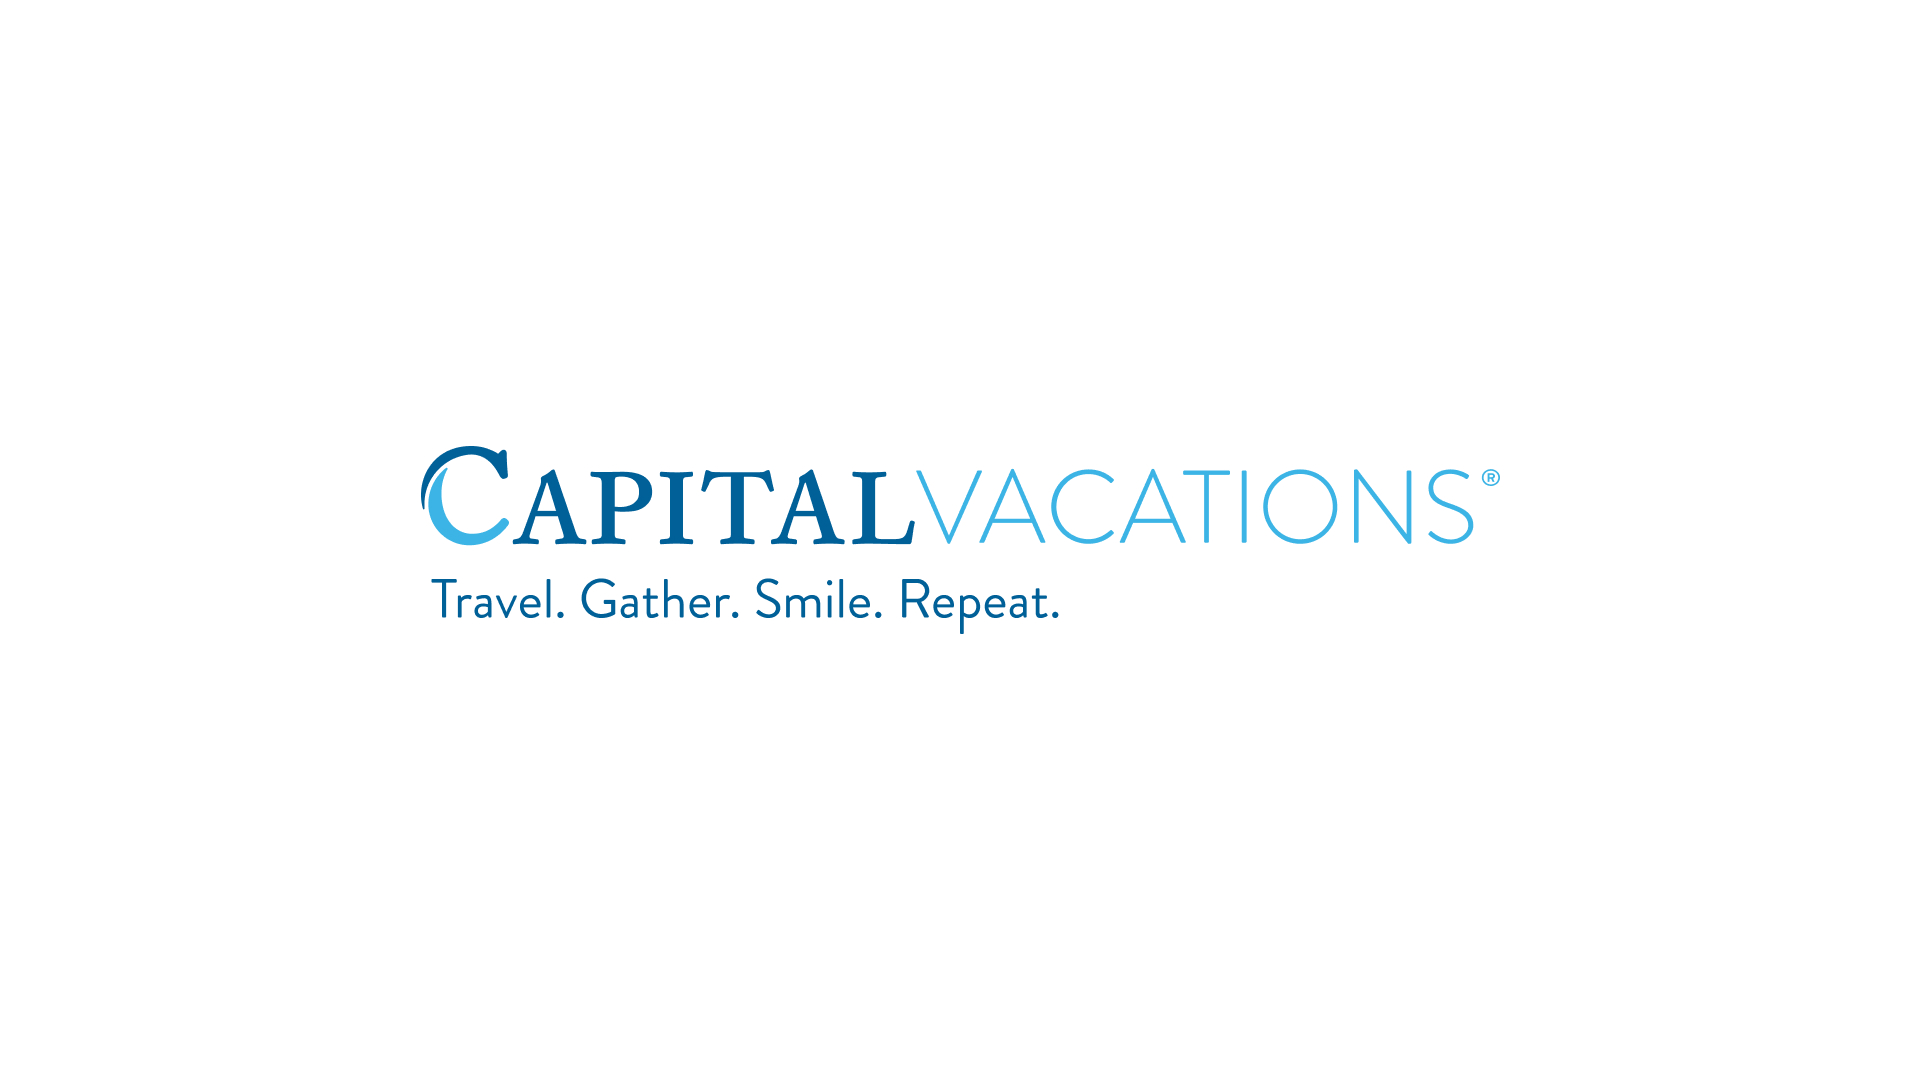 Capital Vacations announces the appointment of Travis Bary and Jerry Rexroad as Co-Presidents